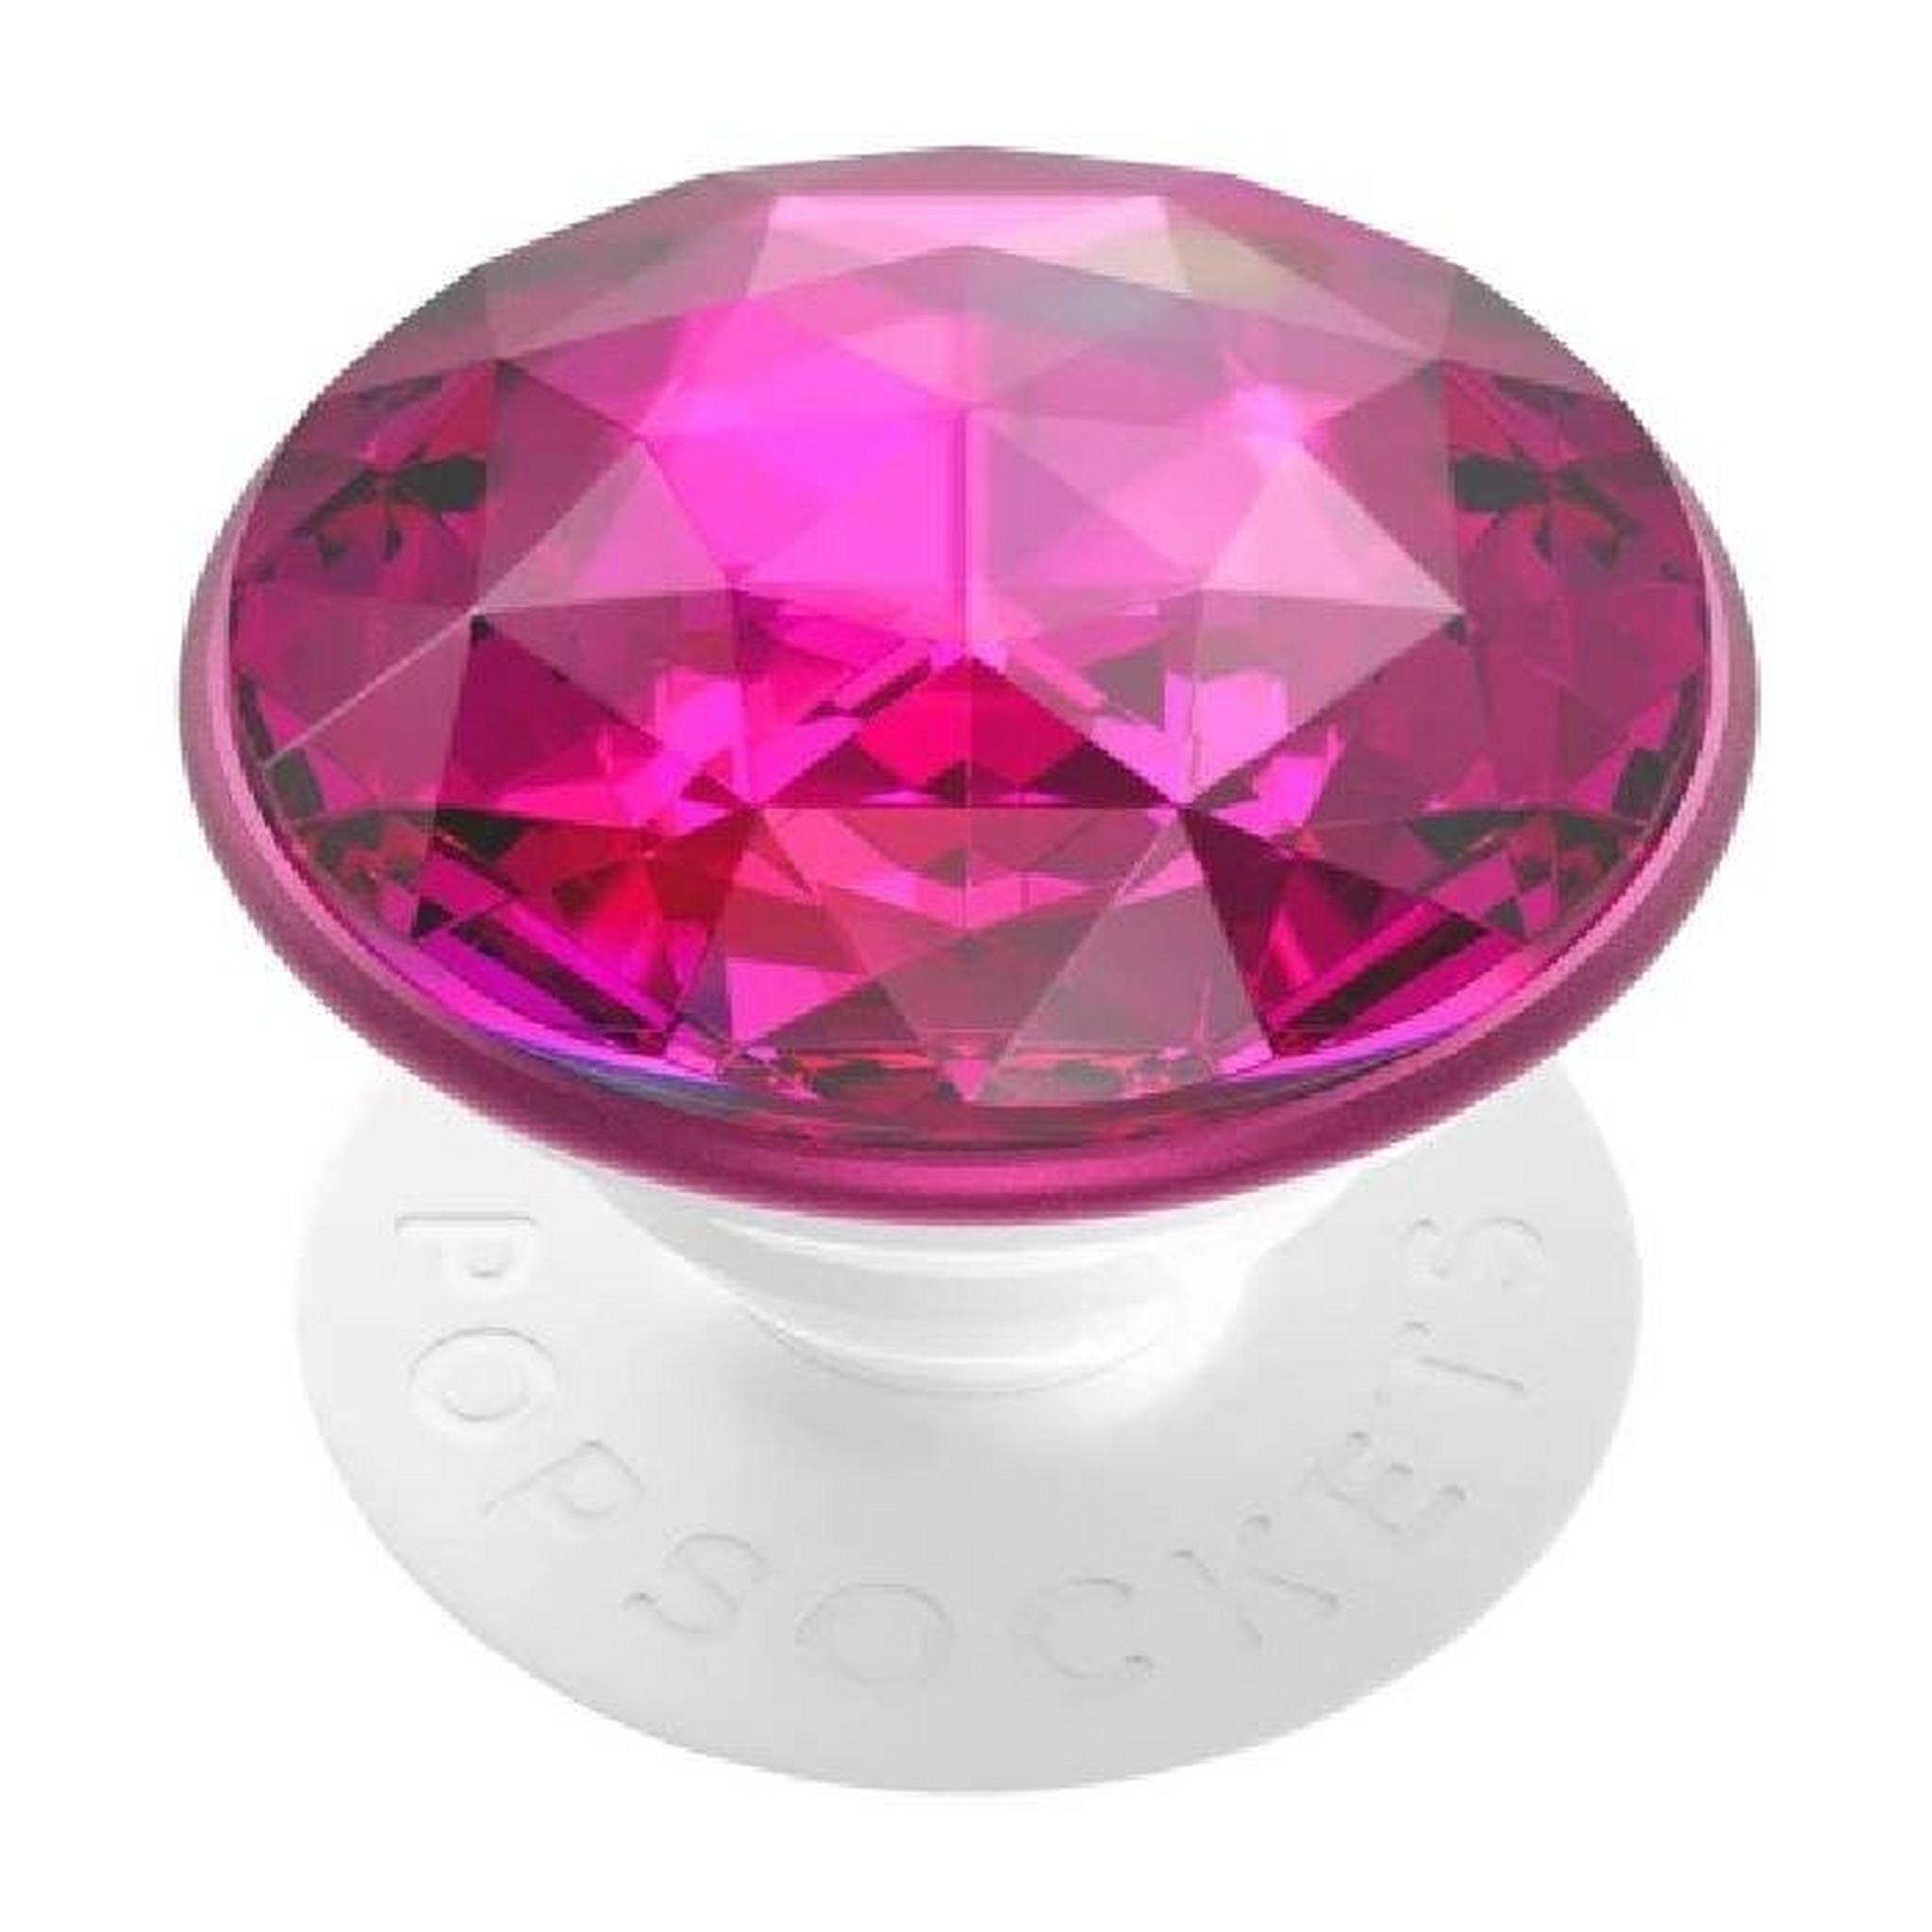 PopSockets Phone Stand and Grip (801526) – Disco Crystal Plum Berry